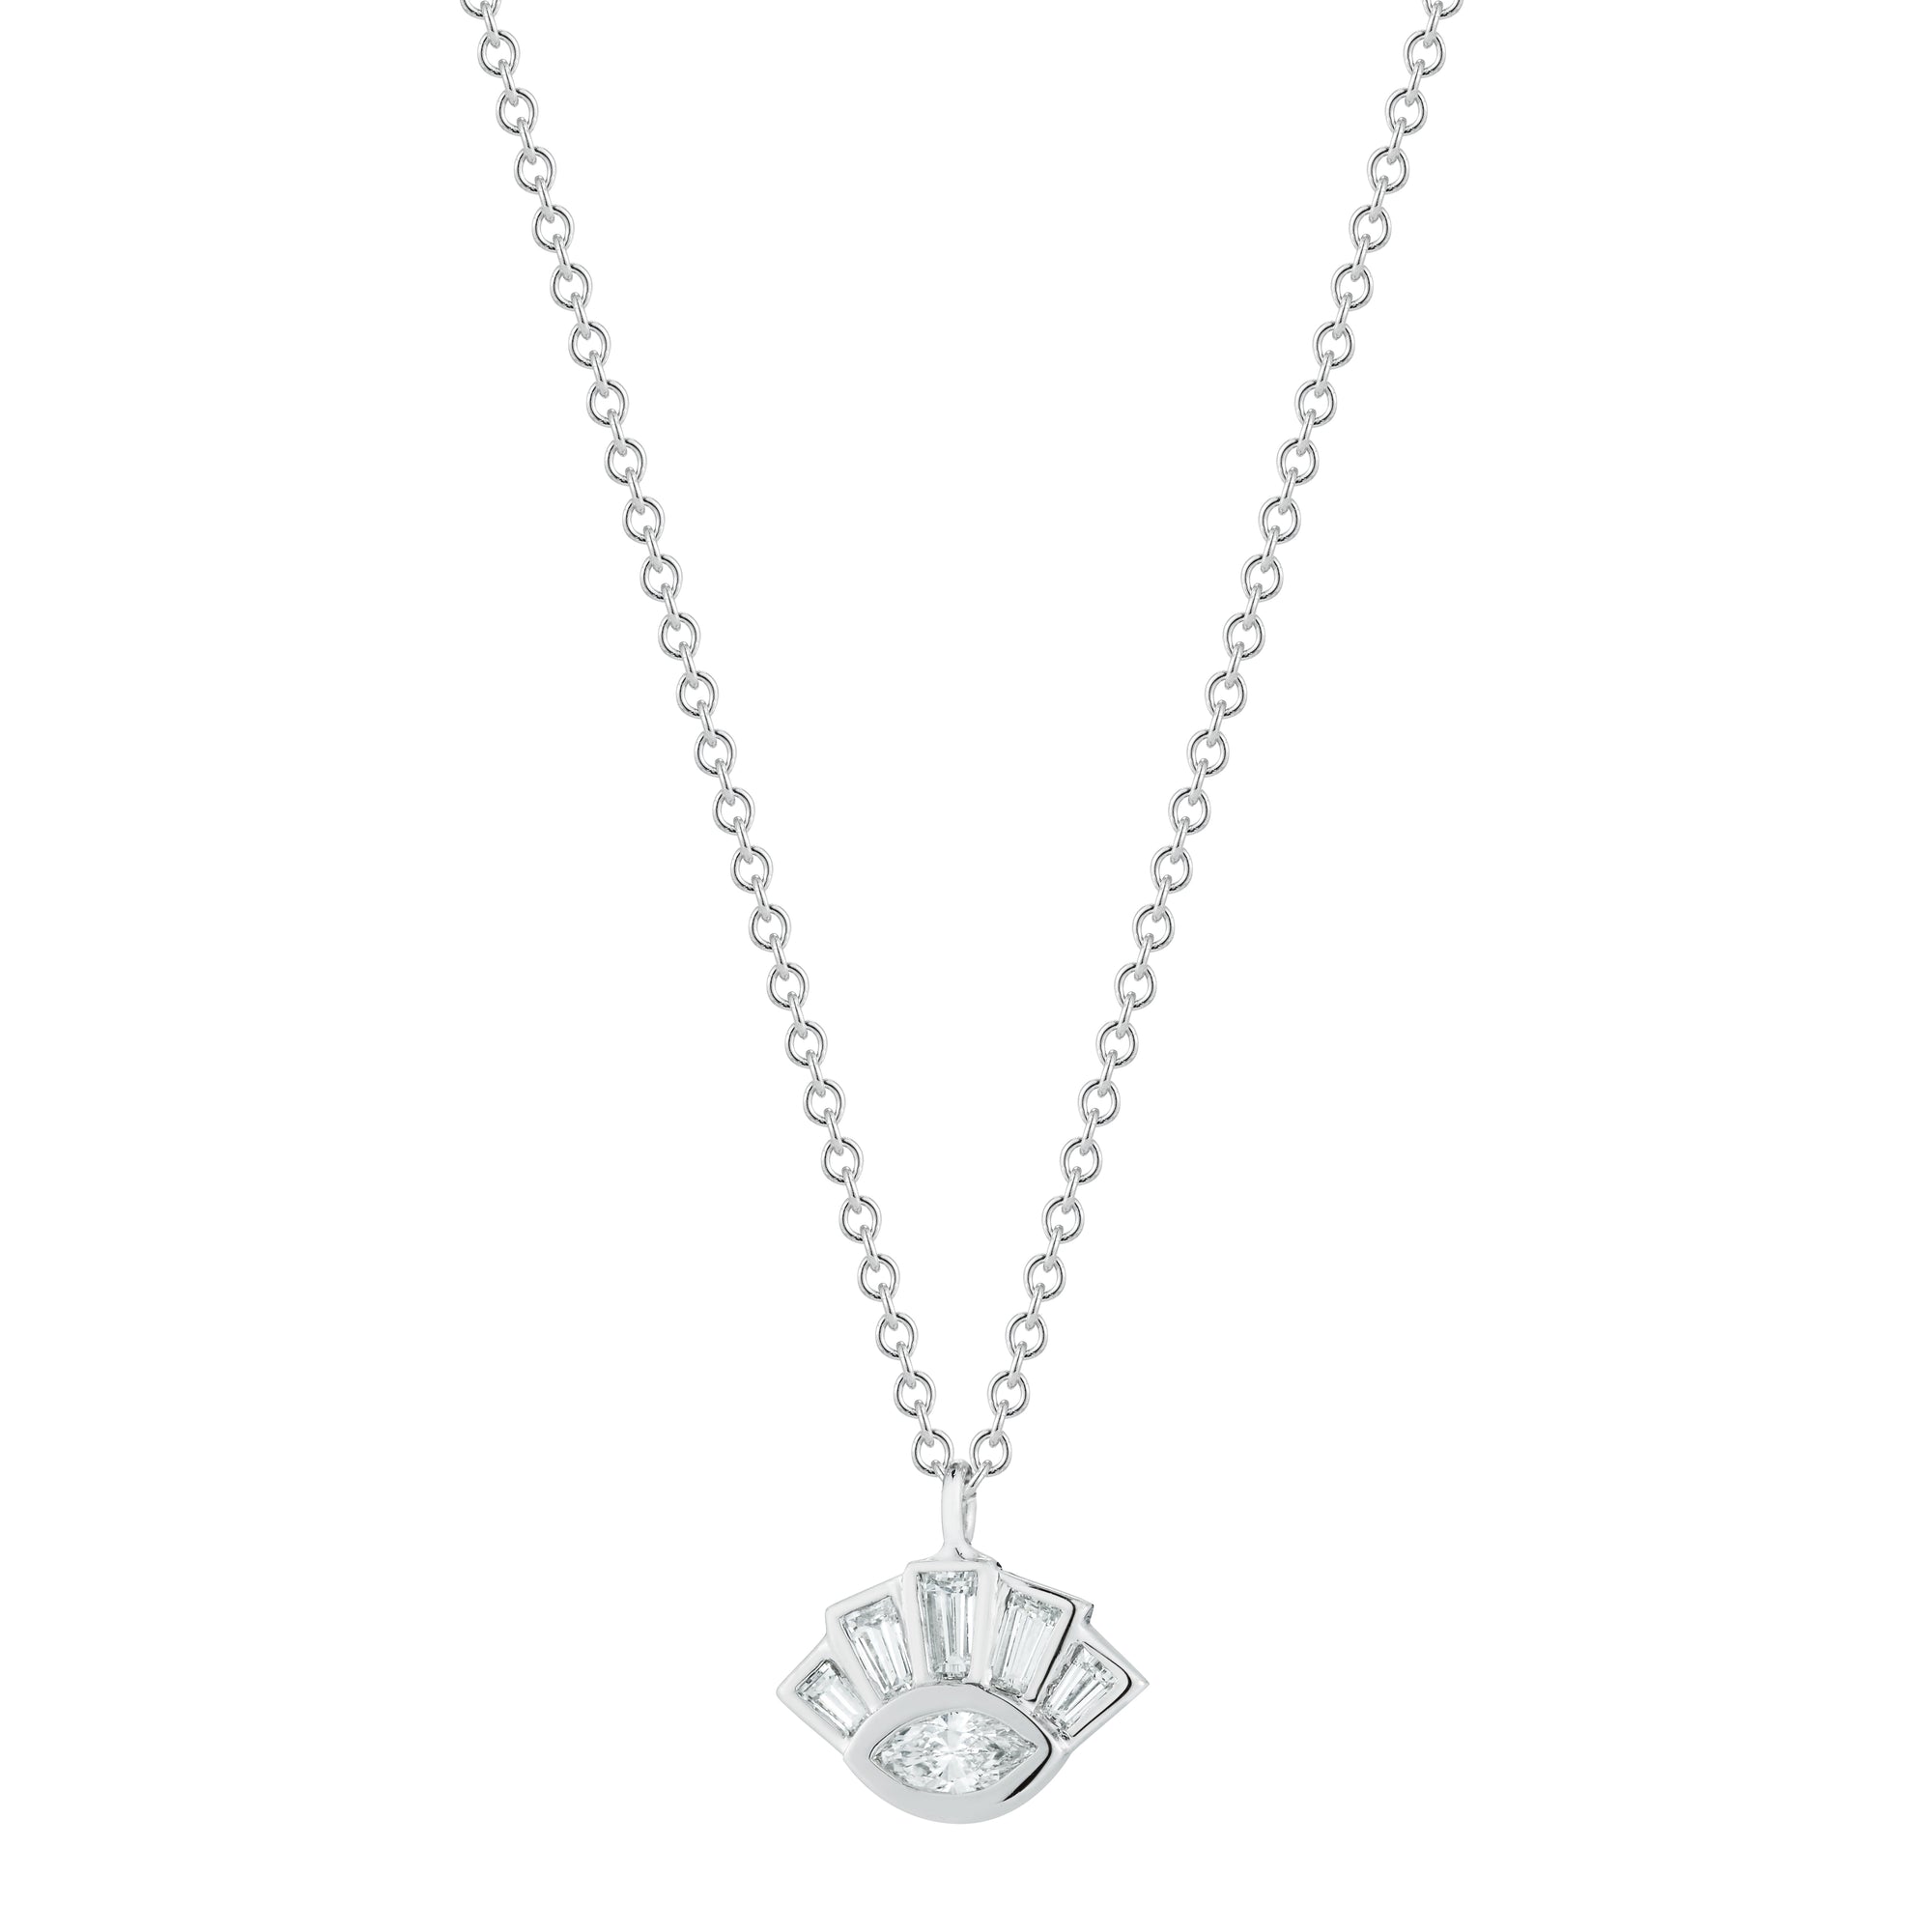 little tiny eye of providence baguette diamond necklace in 18k white gold by finn by candice pool neistat